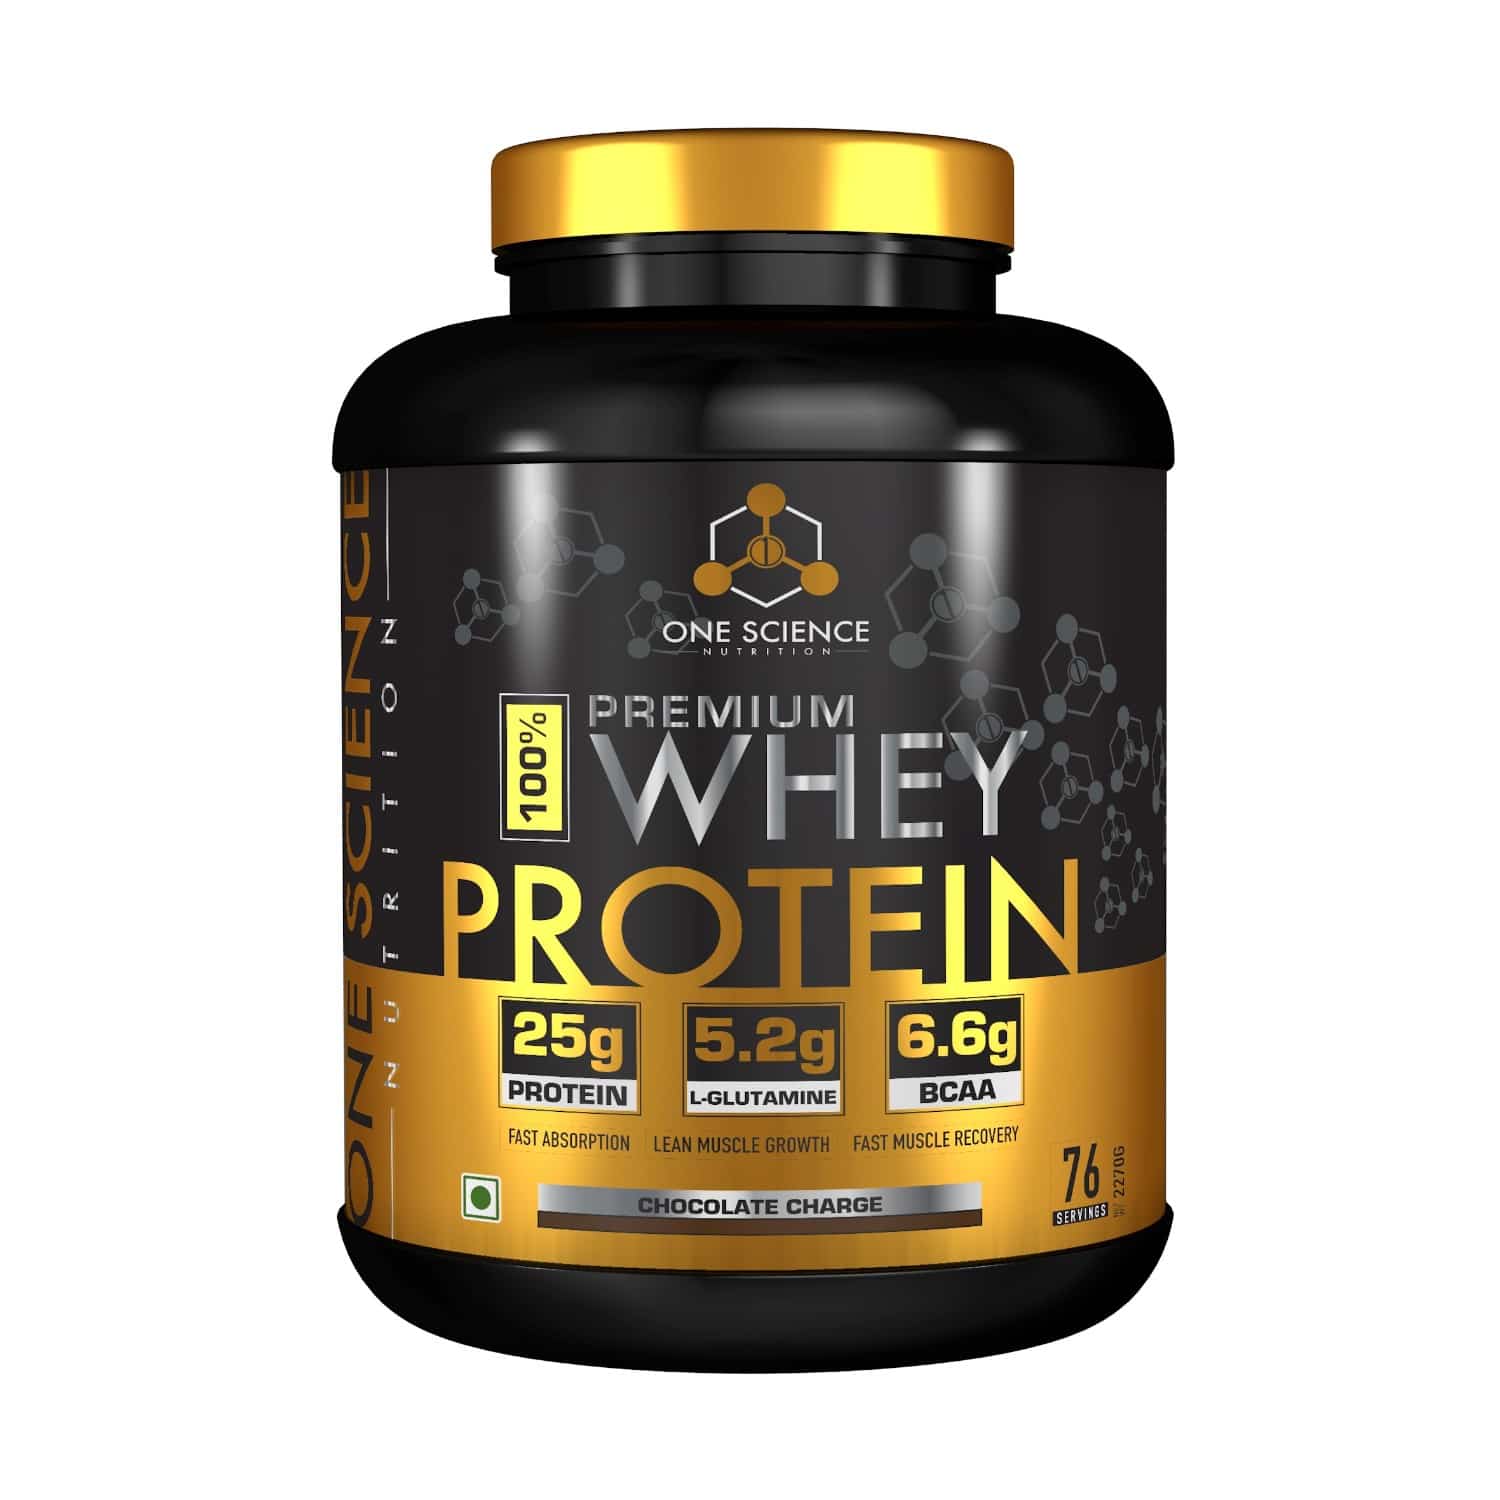 One Science Nutrition Premium Whey Protein 5 Lb (chocolate charge),